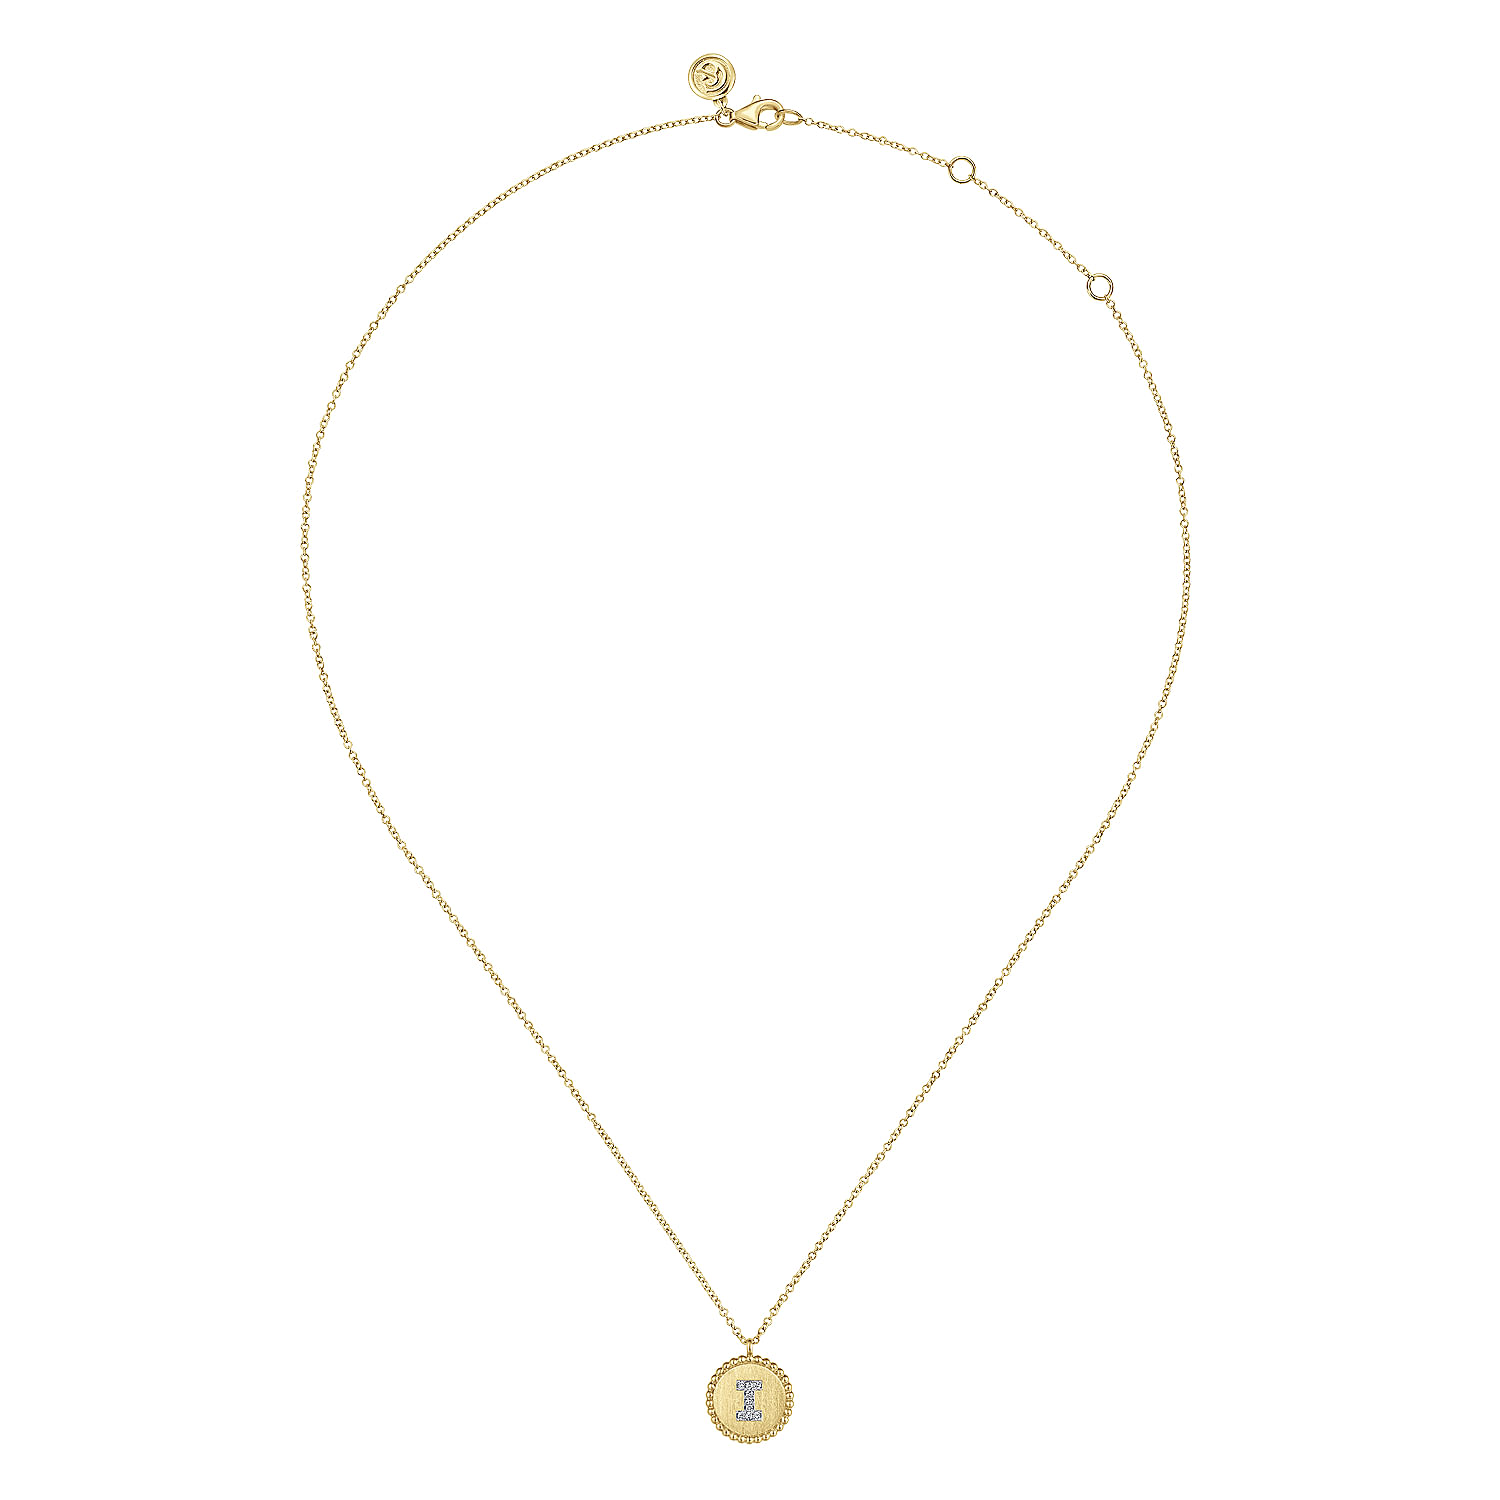 14K Yellow Gold Round I Initial Pendant Necklace with Diamonds